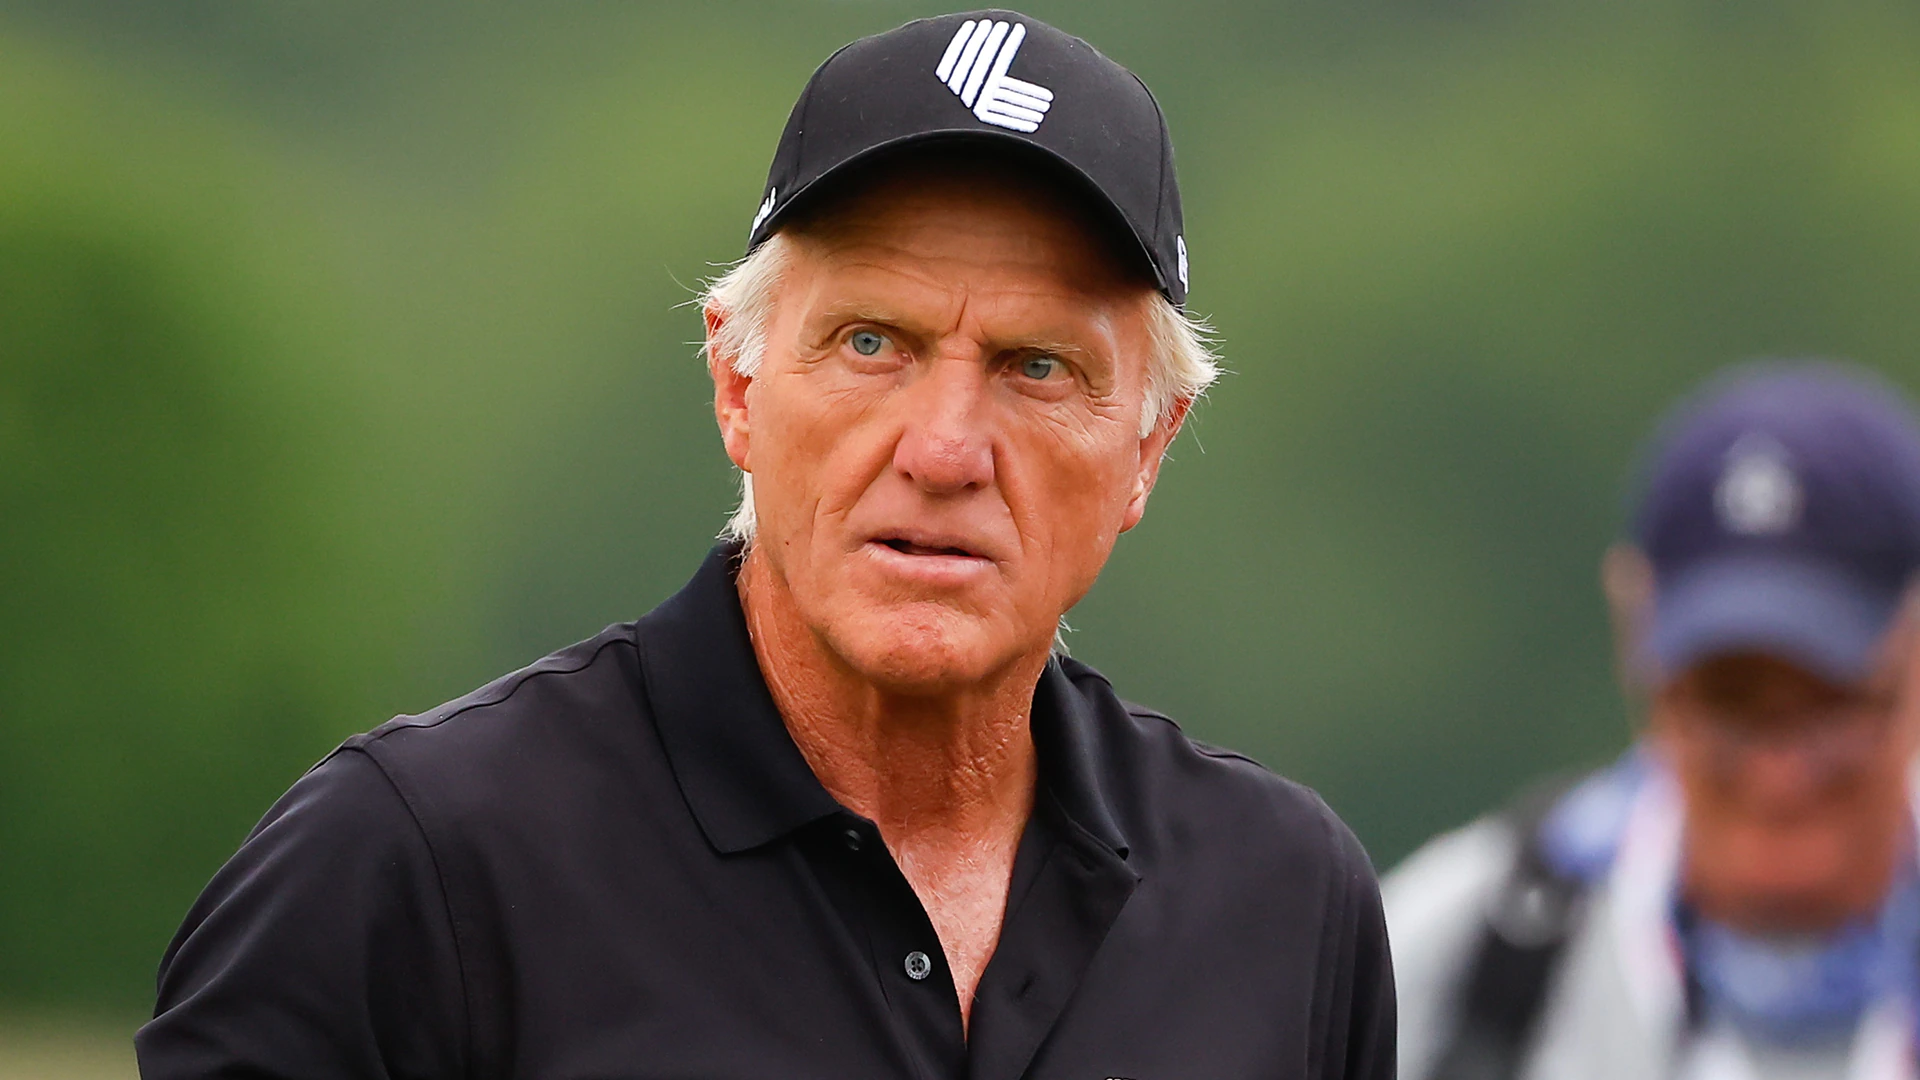 Greg Norman heading to Capitol Hill over LIV Golf antitrust lawsuit